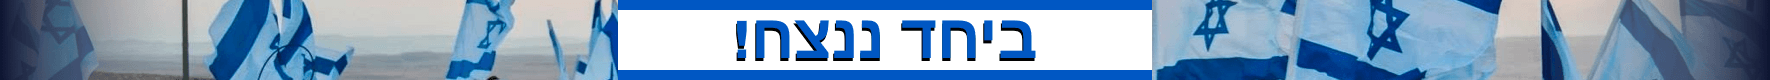 https://www.zipy.co.il/static/images/banner-IDF.png